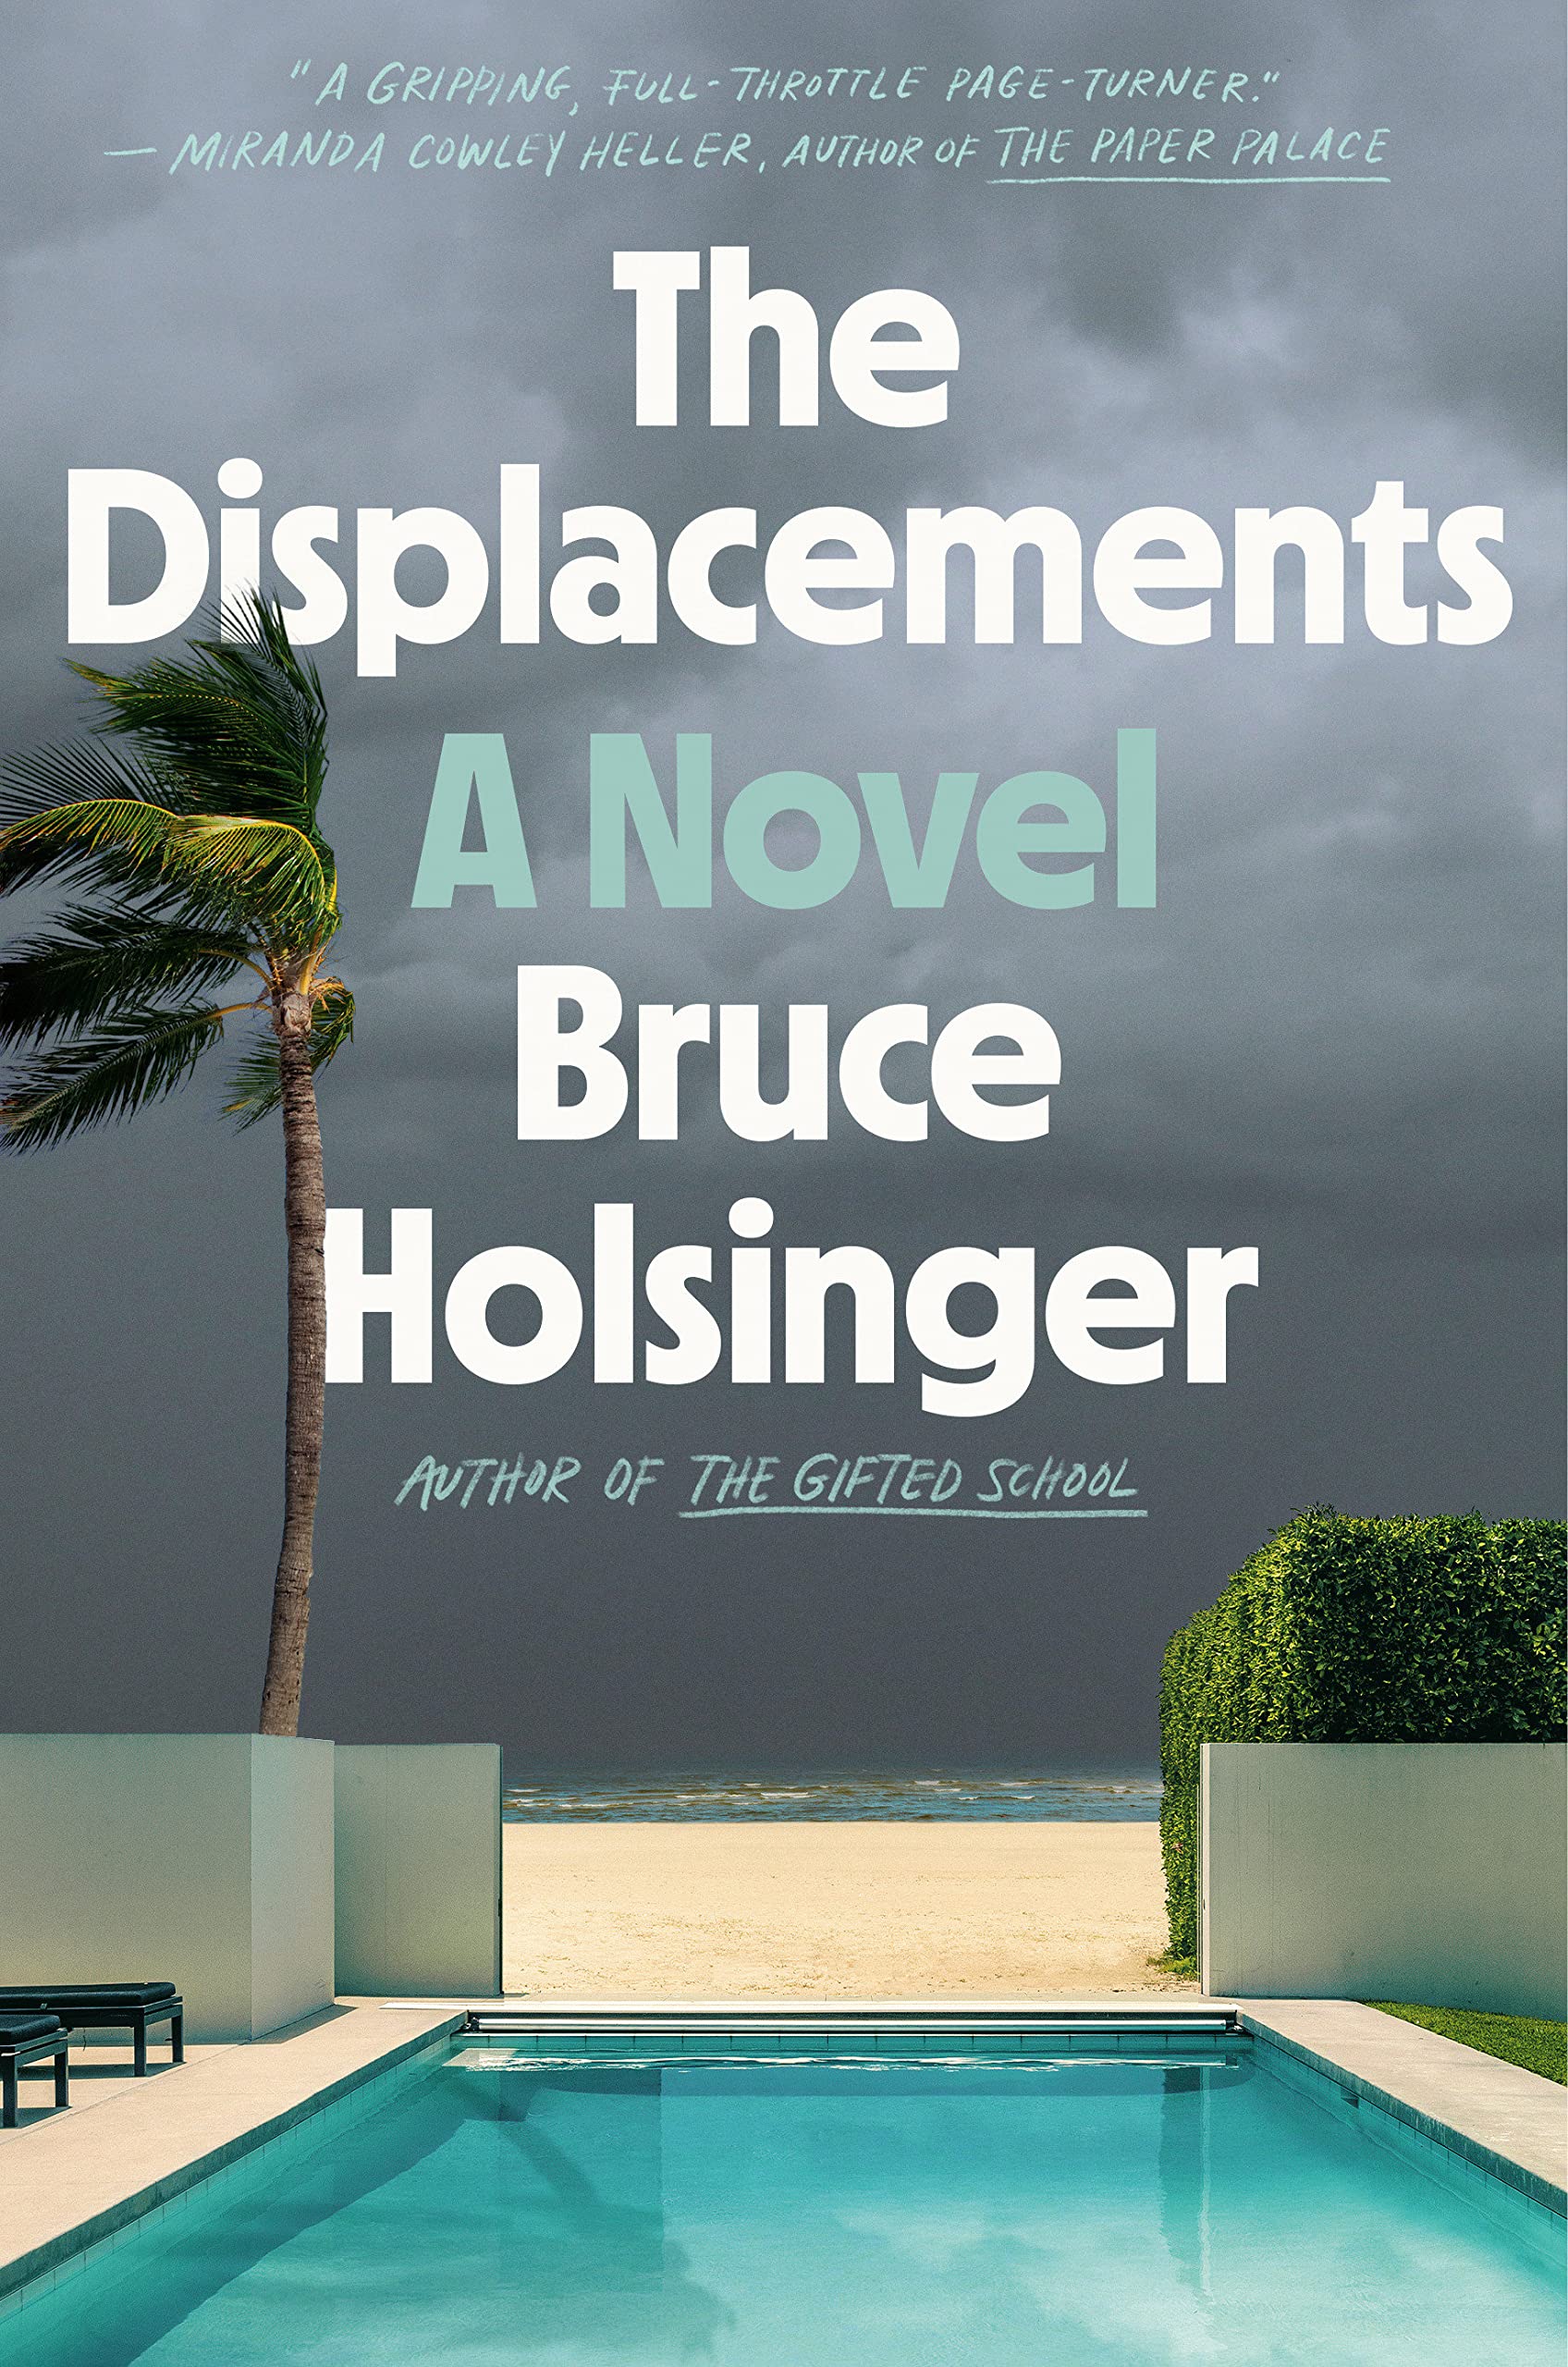 Image for "The Displacements"